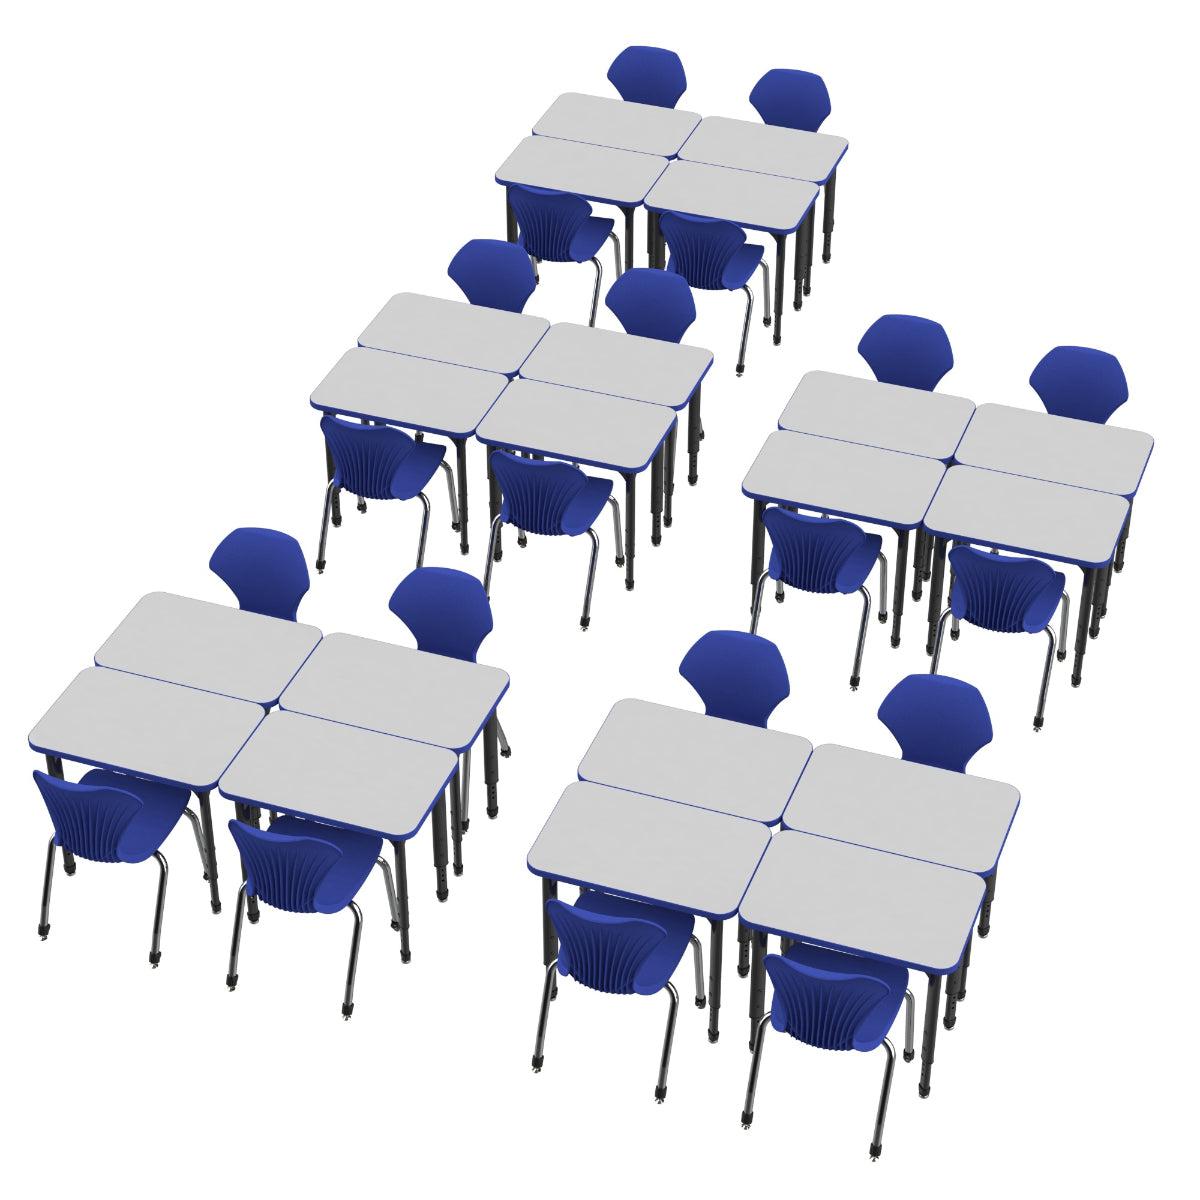 Apex White Dry Erase Classroom Desk and Chair Package, 20 Rectangle Collaborative Student Desks, 20" x 36", with 20 Apex Stack Chairs